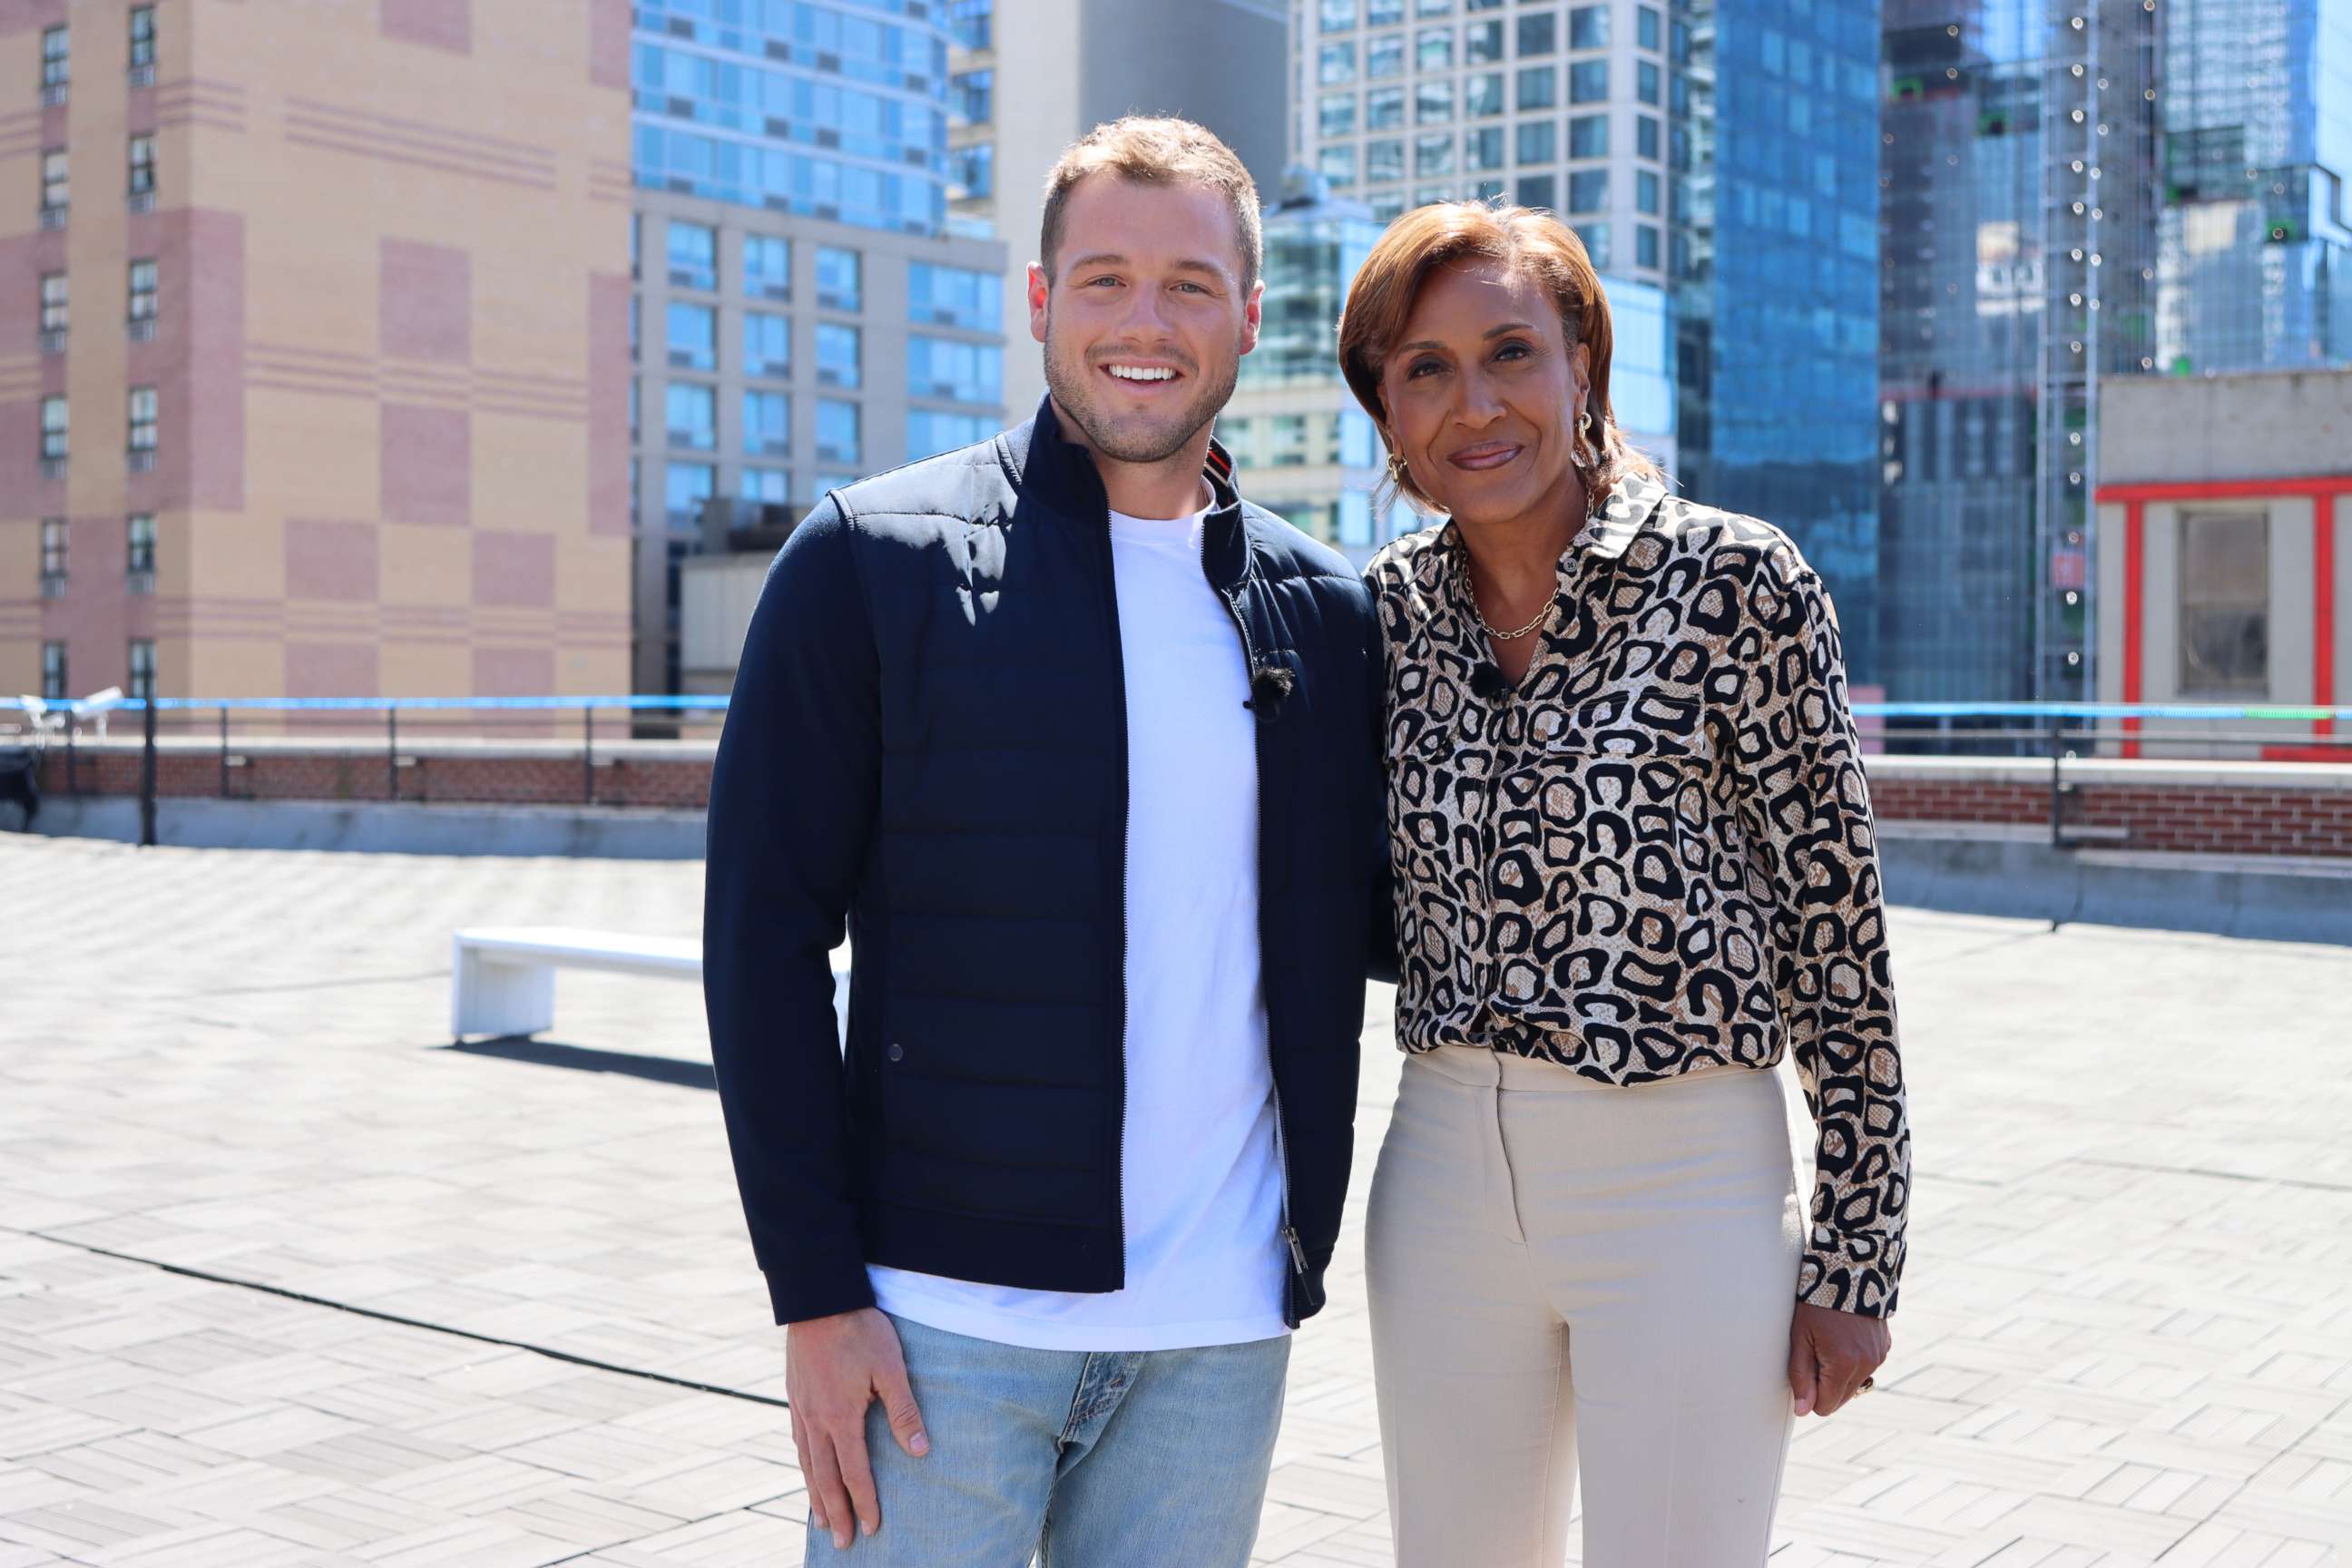 PHOTO: Colton Underwood, the lead on season 23 of "The Bachelor," with "GMA" Co-Anchor Robin Roberts during in interview in April 2021.